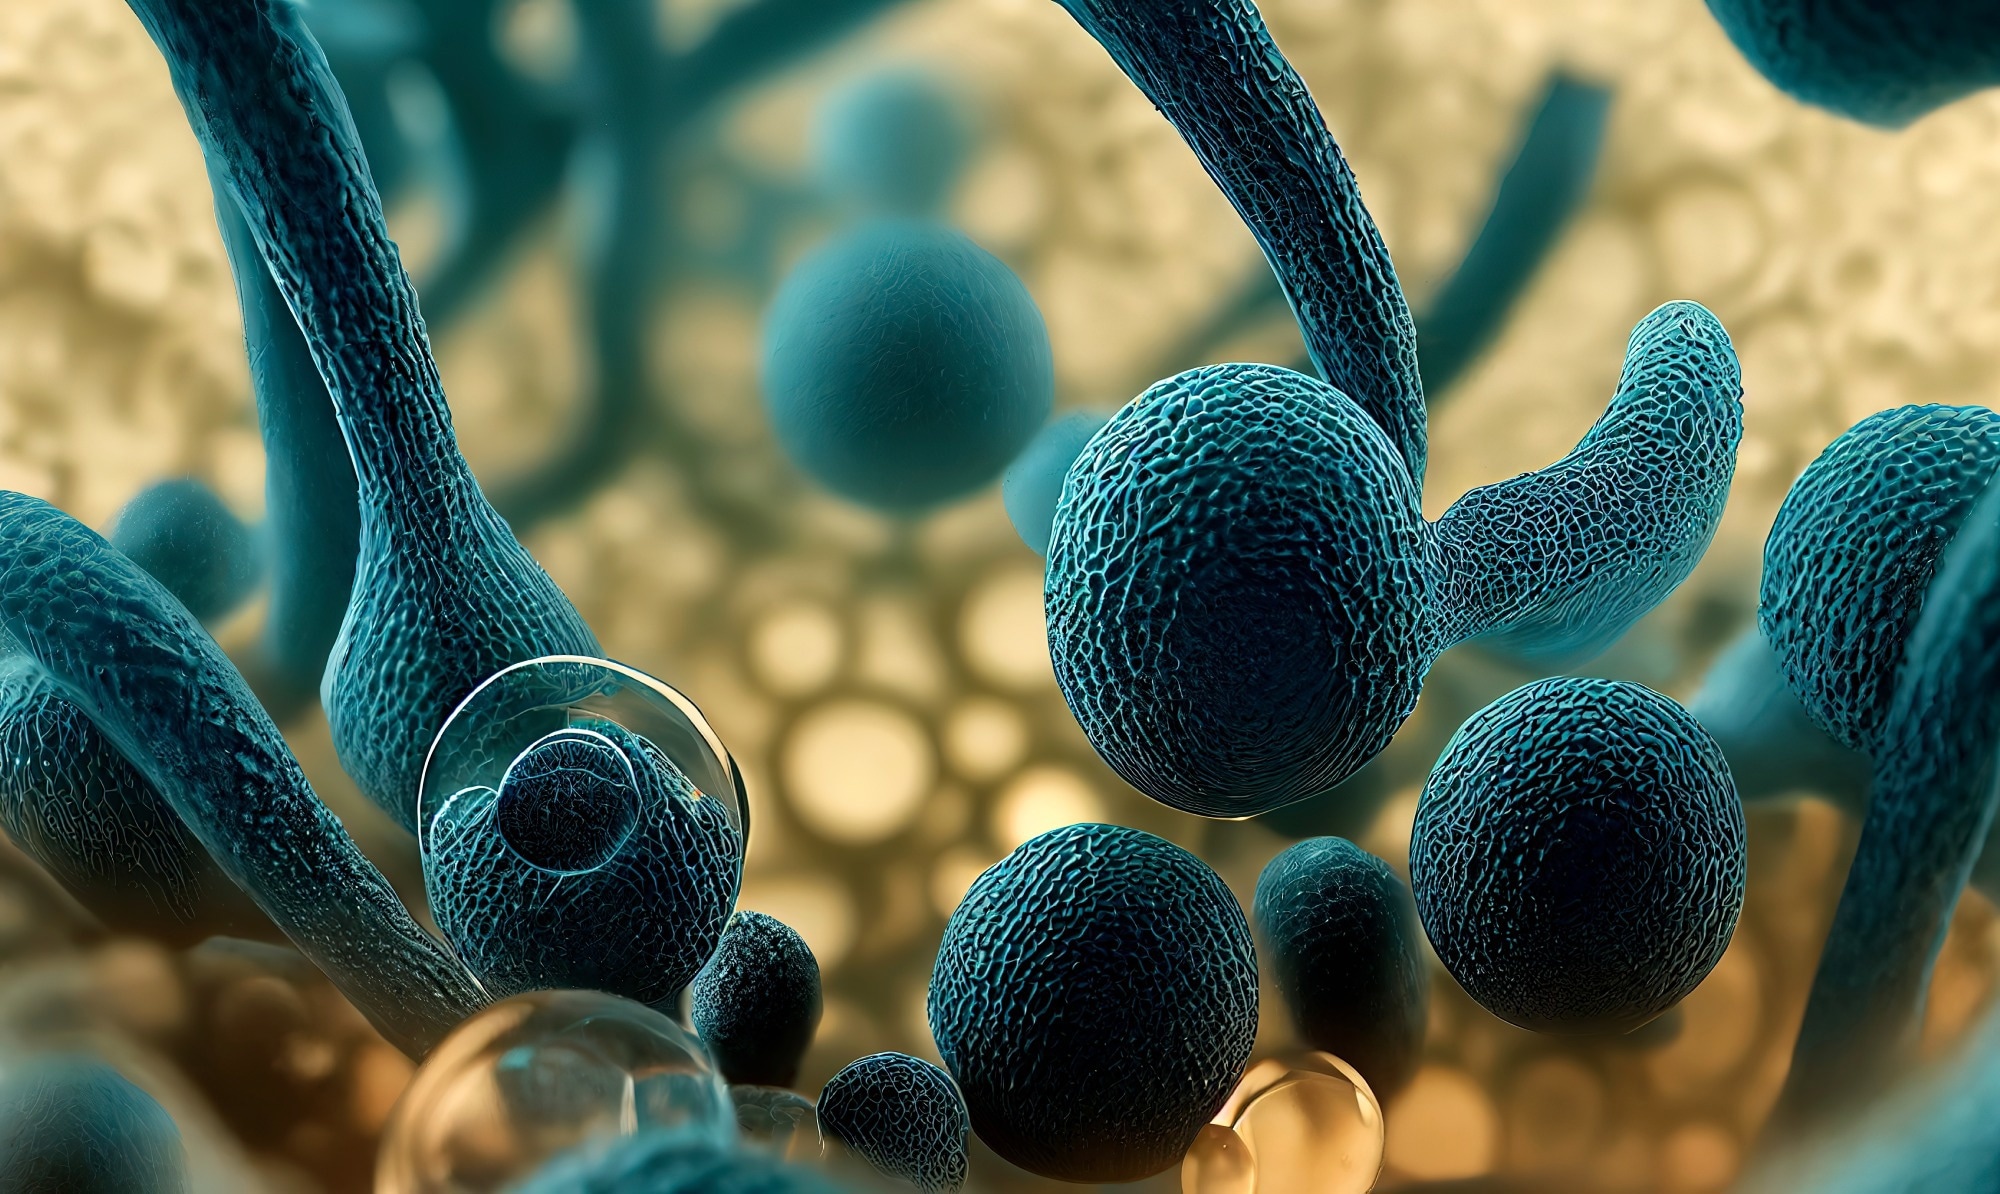 Study: Perspective on the origin, resistance, and spread of the emerging human fungal pathogen Candida auris. Image Credit: Vikks / Shutterstock